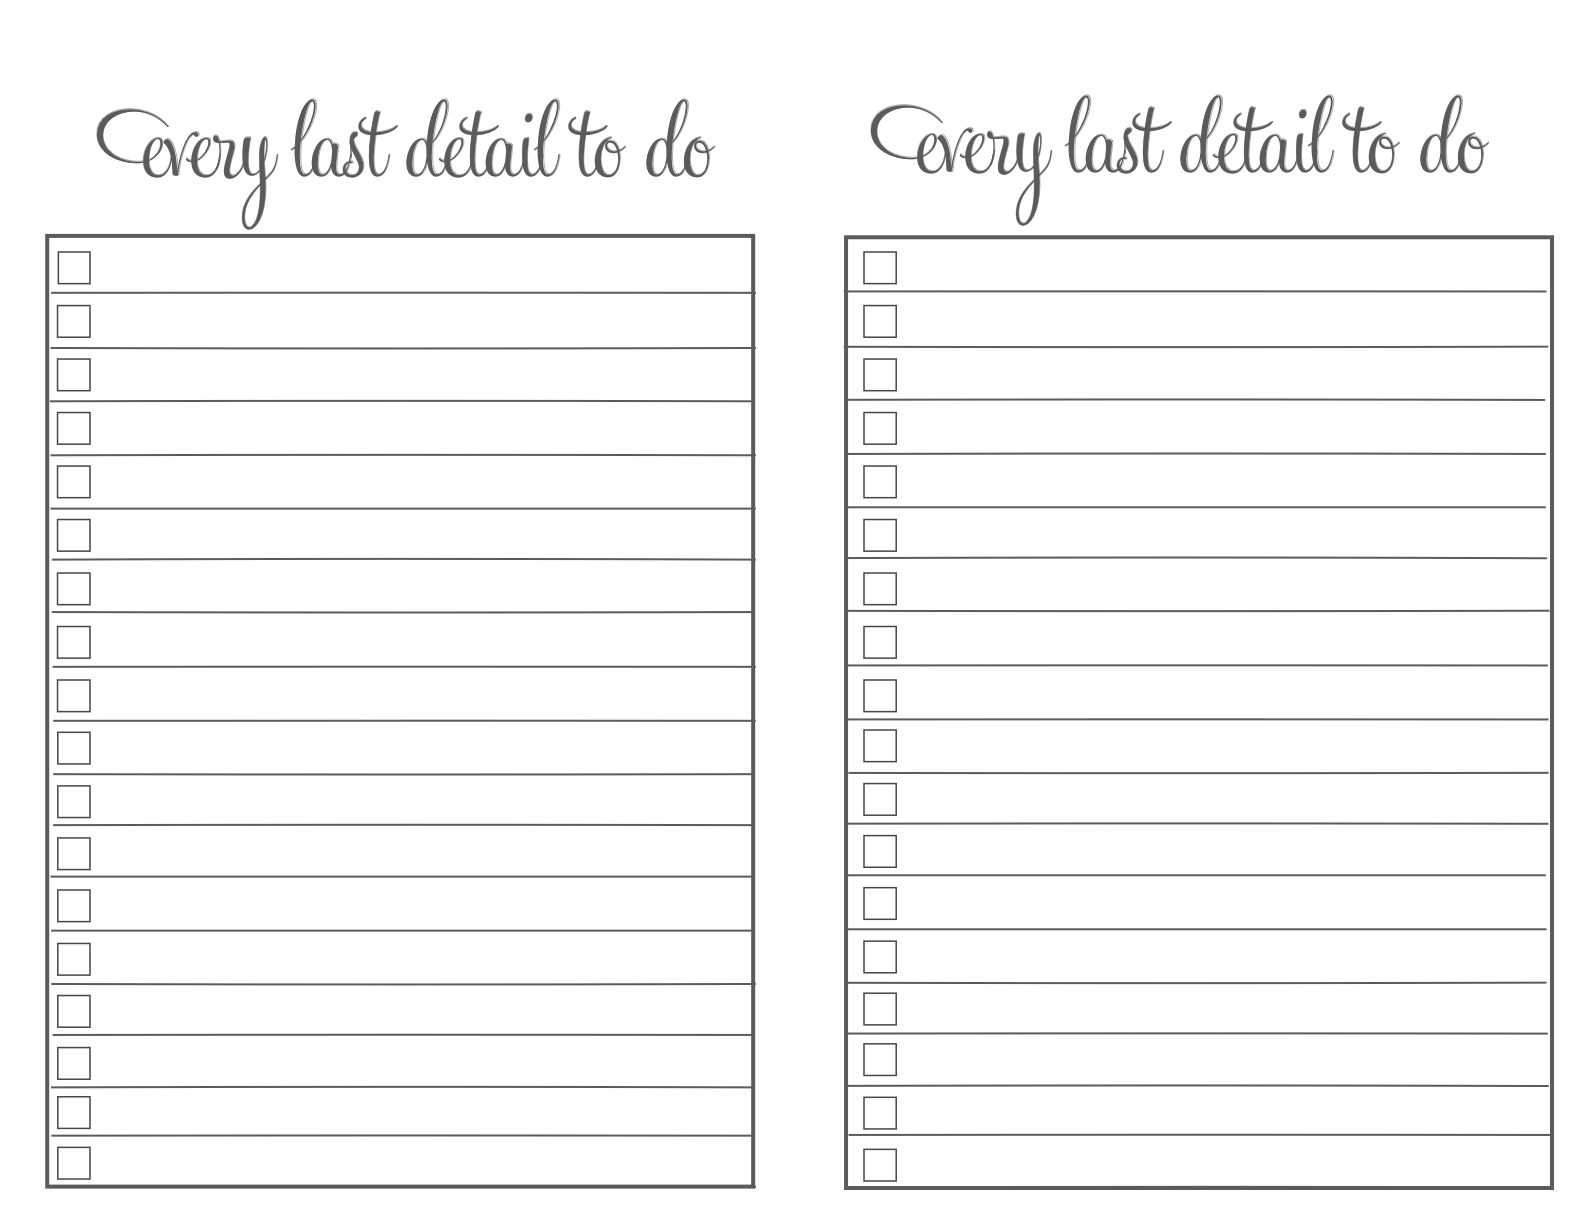 40 Printable To Do List Templates | Kittybabylove Inside Blank To Do List Template